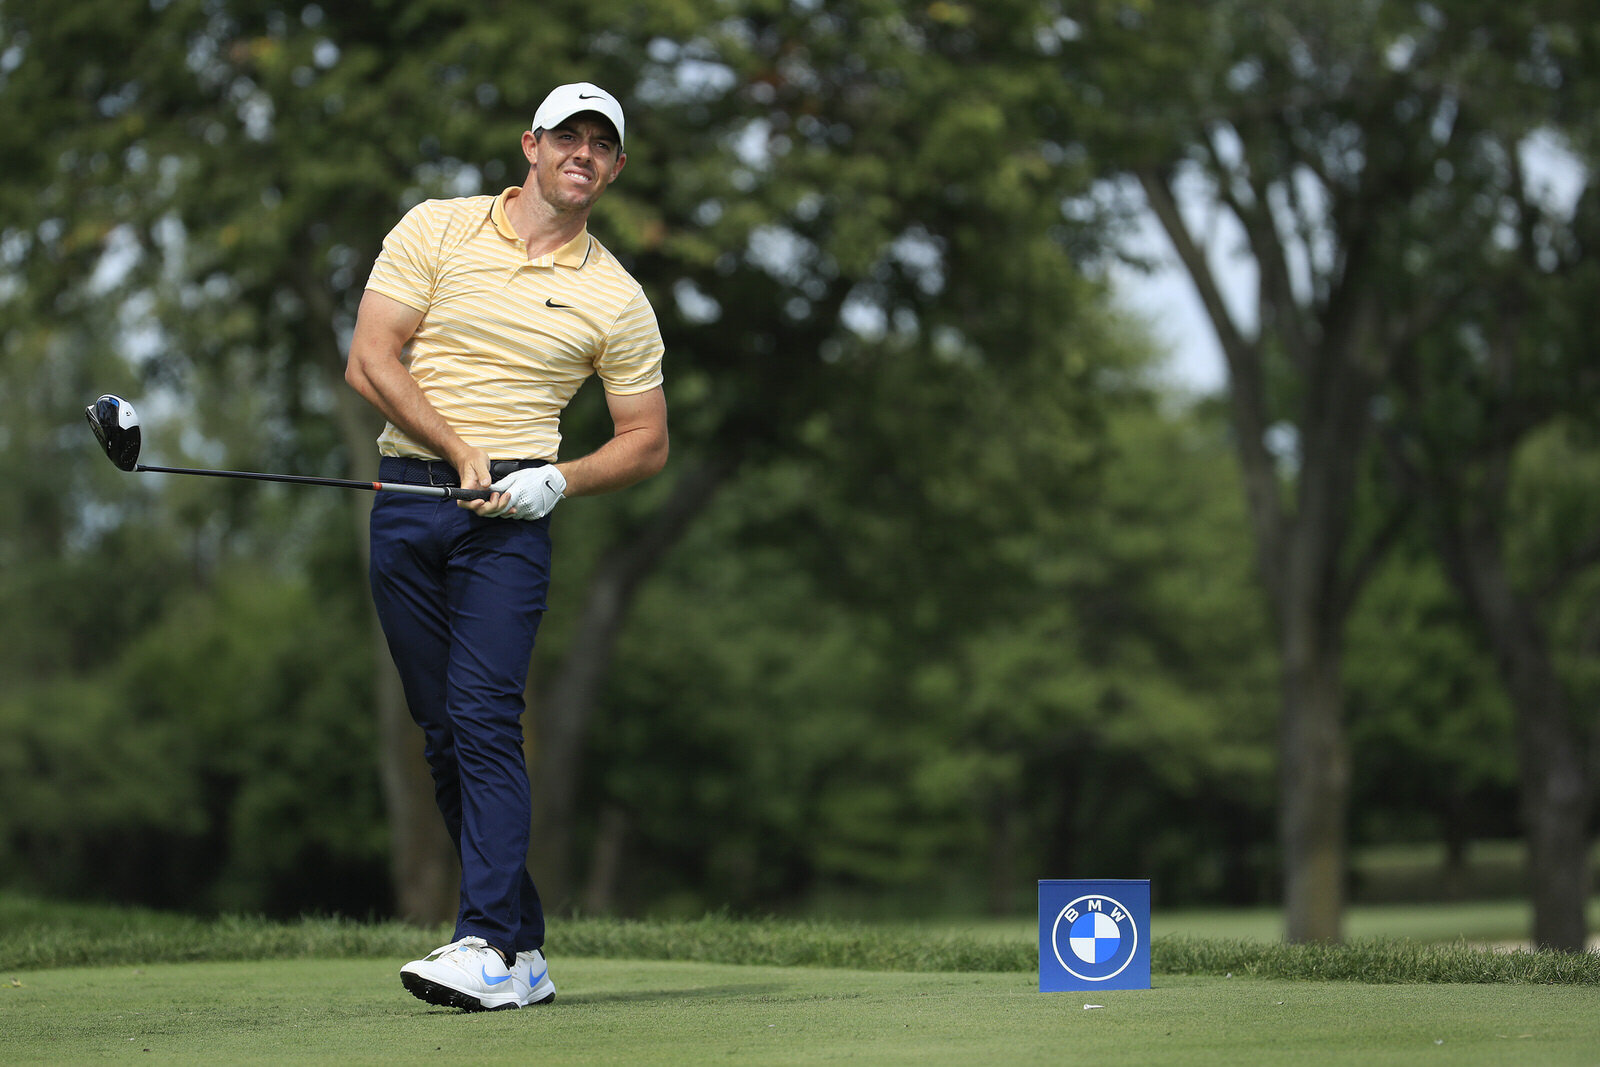  OLYMPIA FIELDS, ILLINOIS - AUGUST 29: Rory McIlroy of Northern Ireland watches his shot from the ninth tee during the third round of the BMW Championship on the North Course at Olympia Fields Country Club on August 29, 2020 in Olympia Fields, Illino